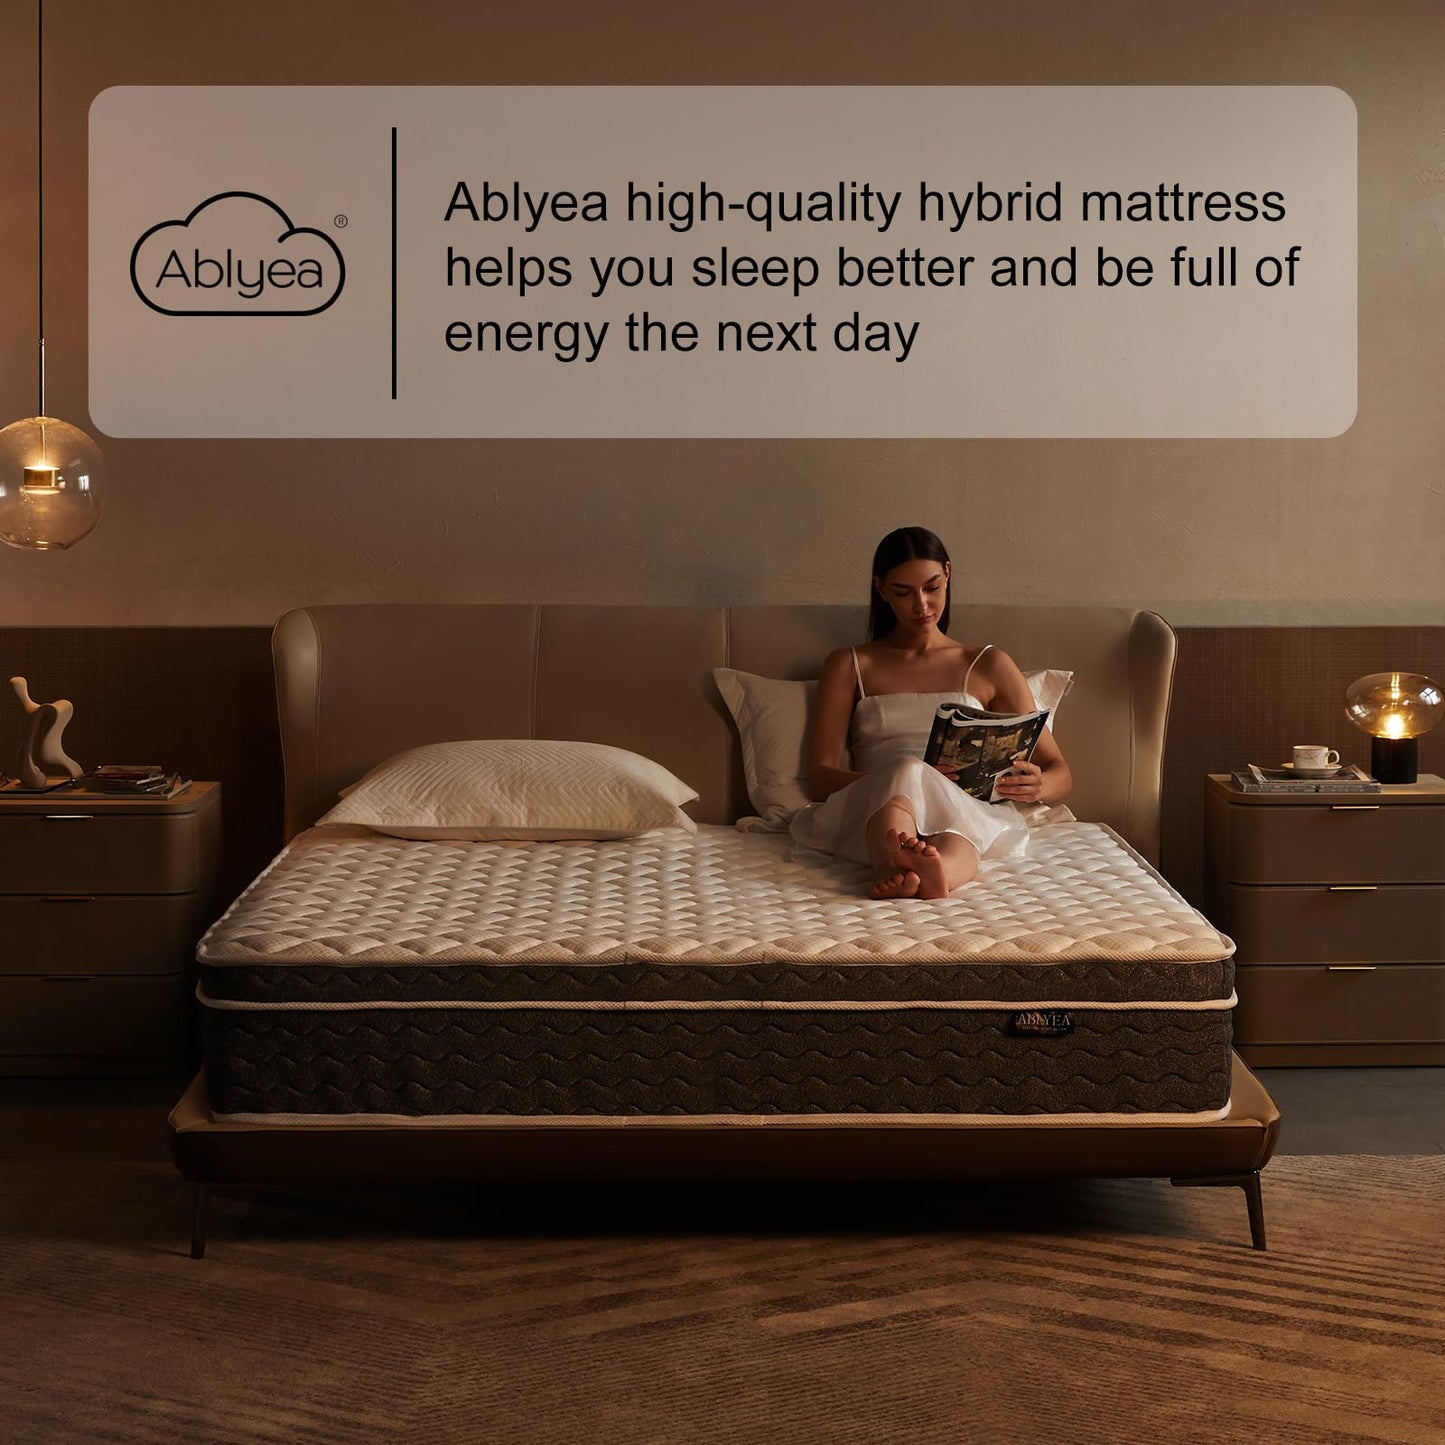 Ablyea Queen Mattresses 12 Inch Hybrid Mattress in a Box with Gel Memory Foam, Individually Wrapped Pocket Coils Innerspring, CertiPUR-US Certified, Pressure Relief & Support, Medium Firm